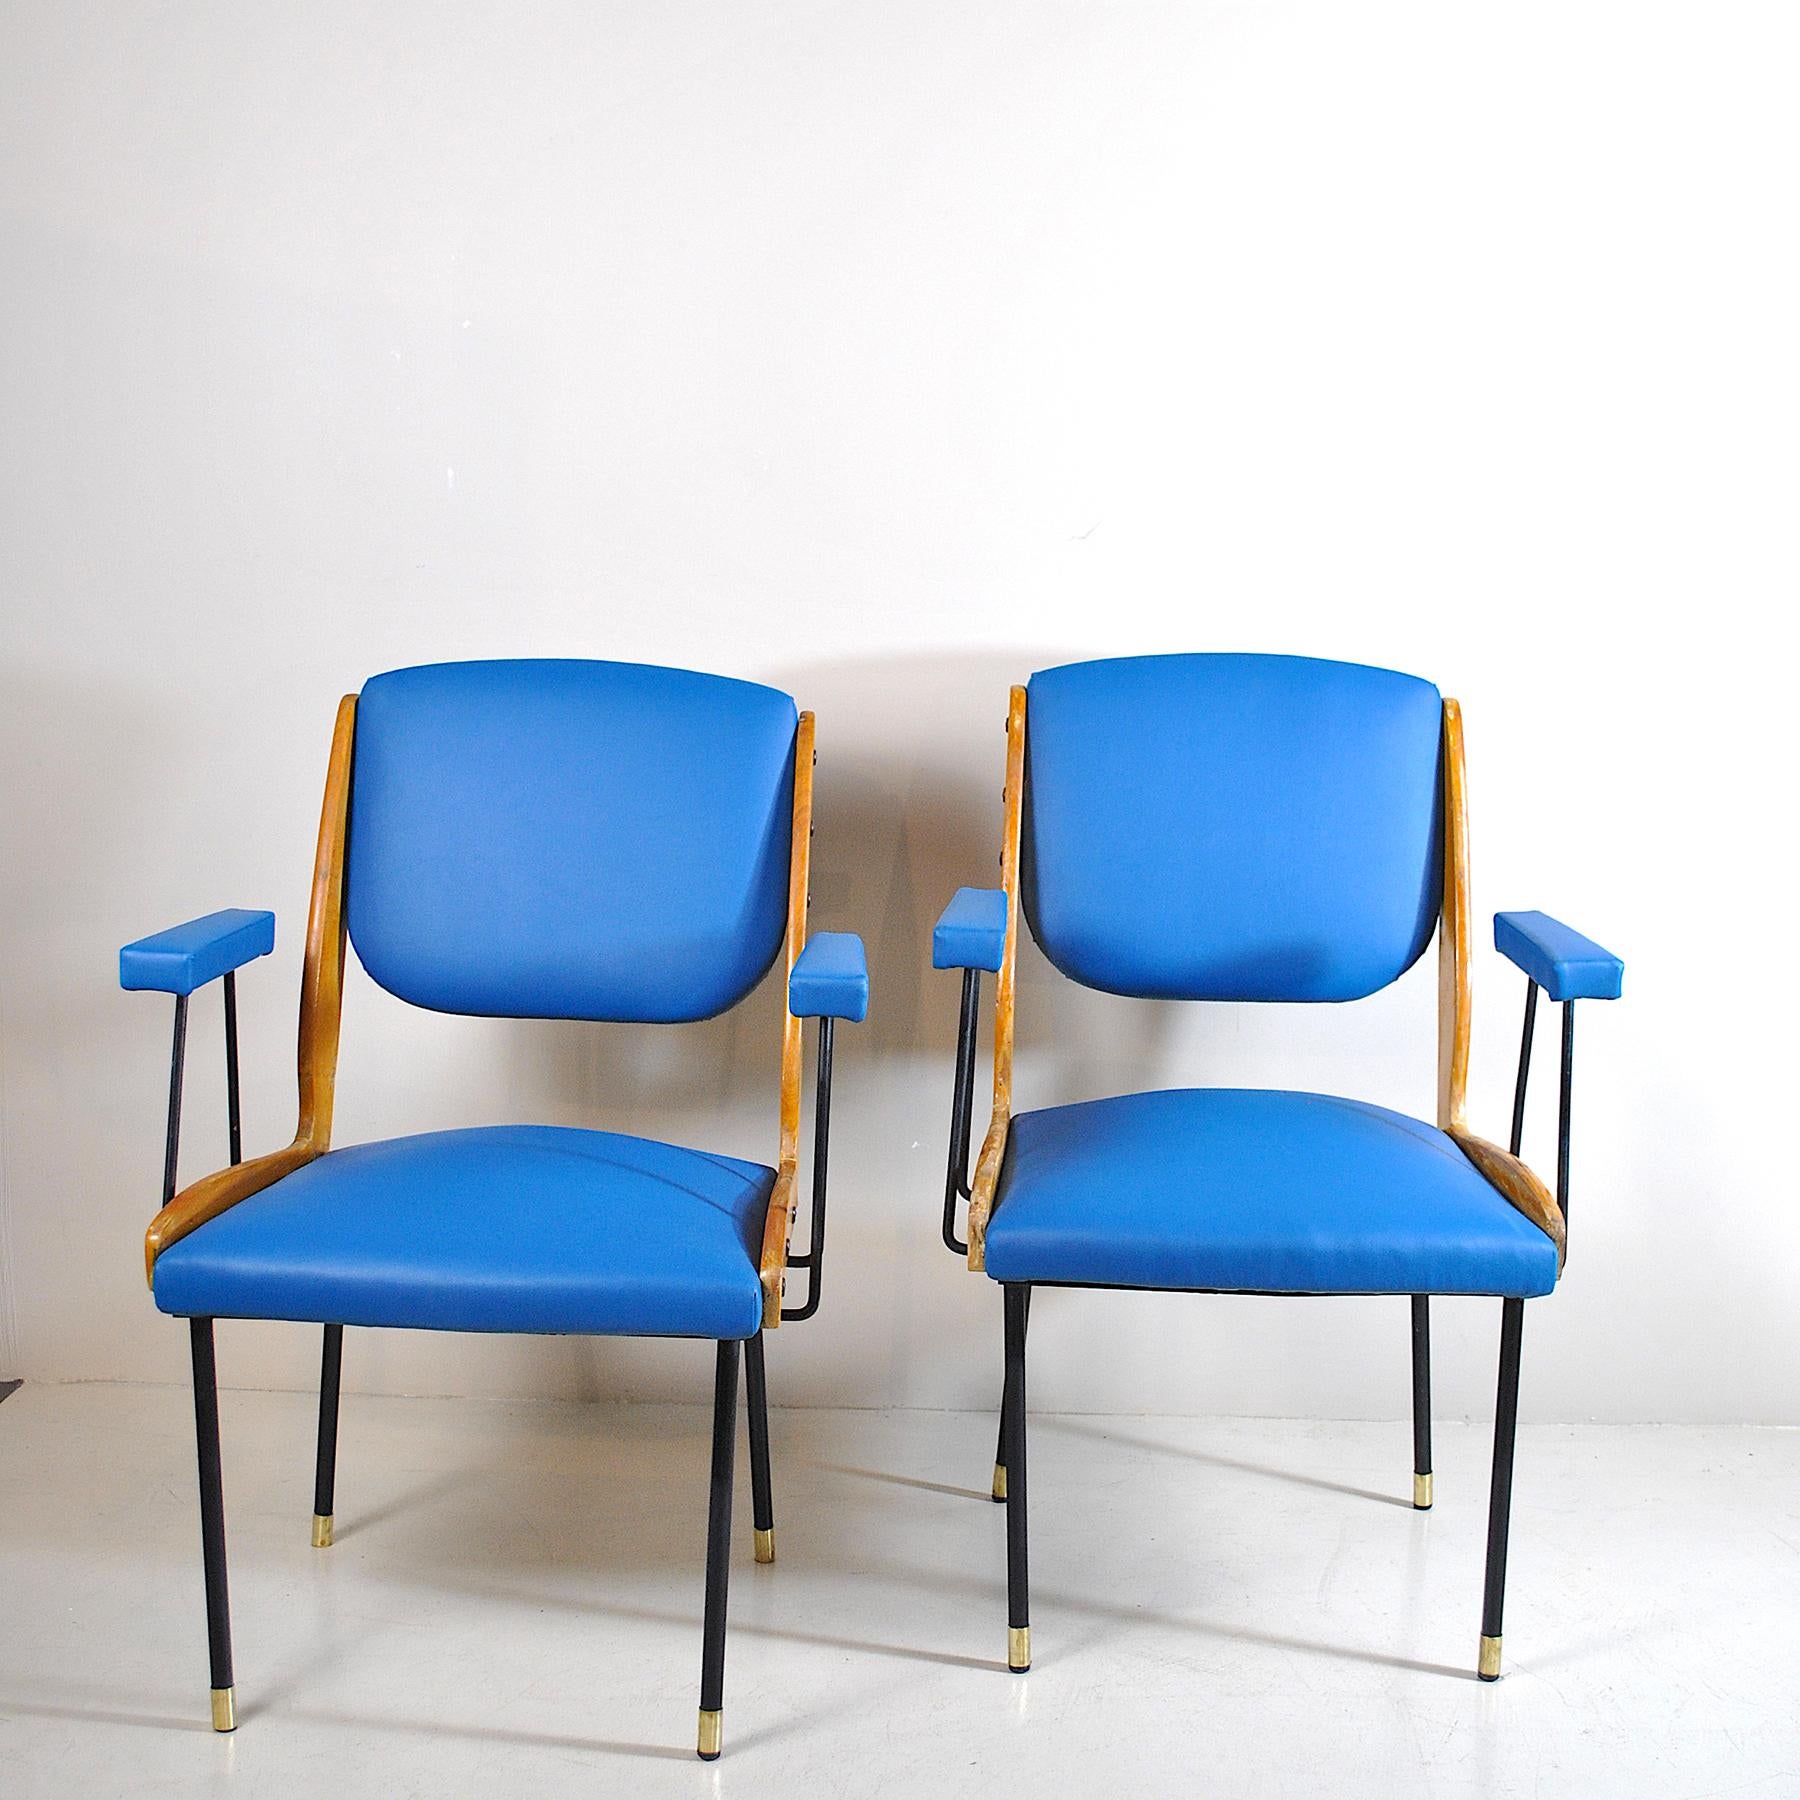 Italian Midcentury Pari of Chairs In Good Condition For Sale In bari, IT